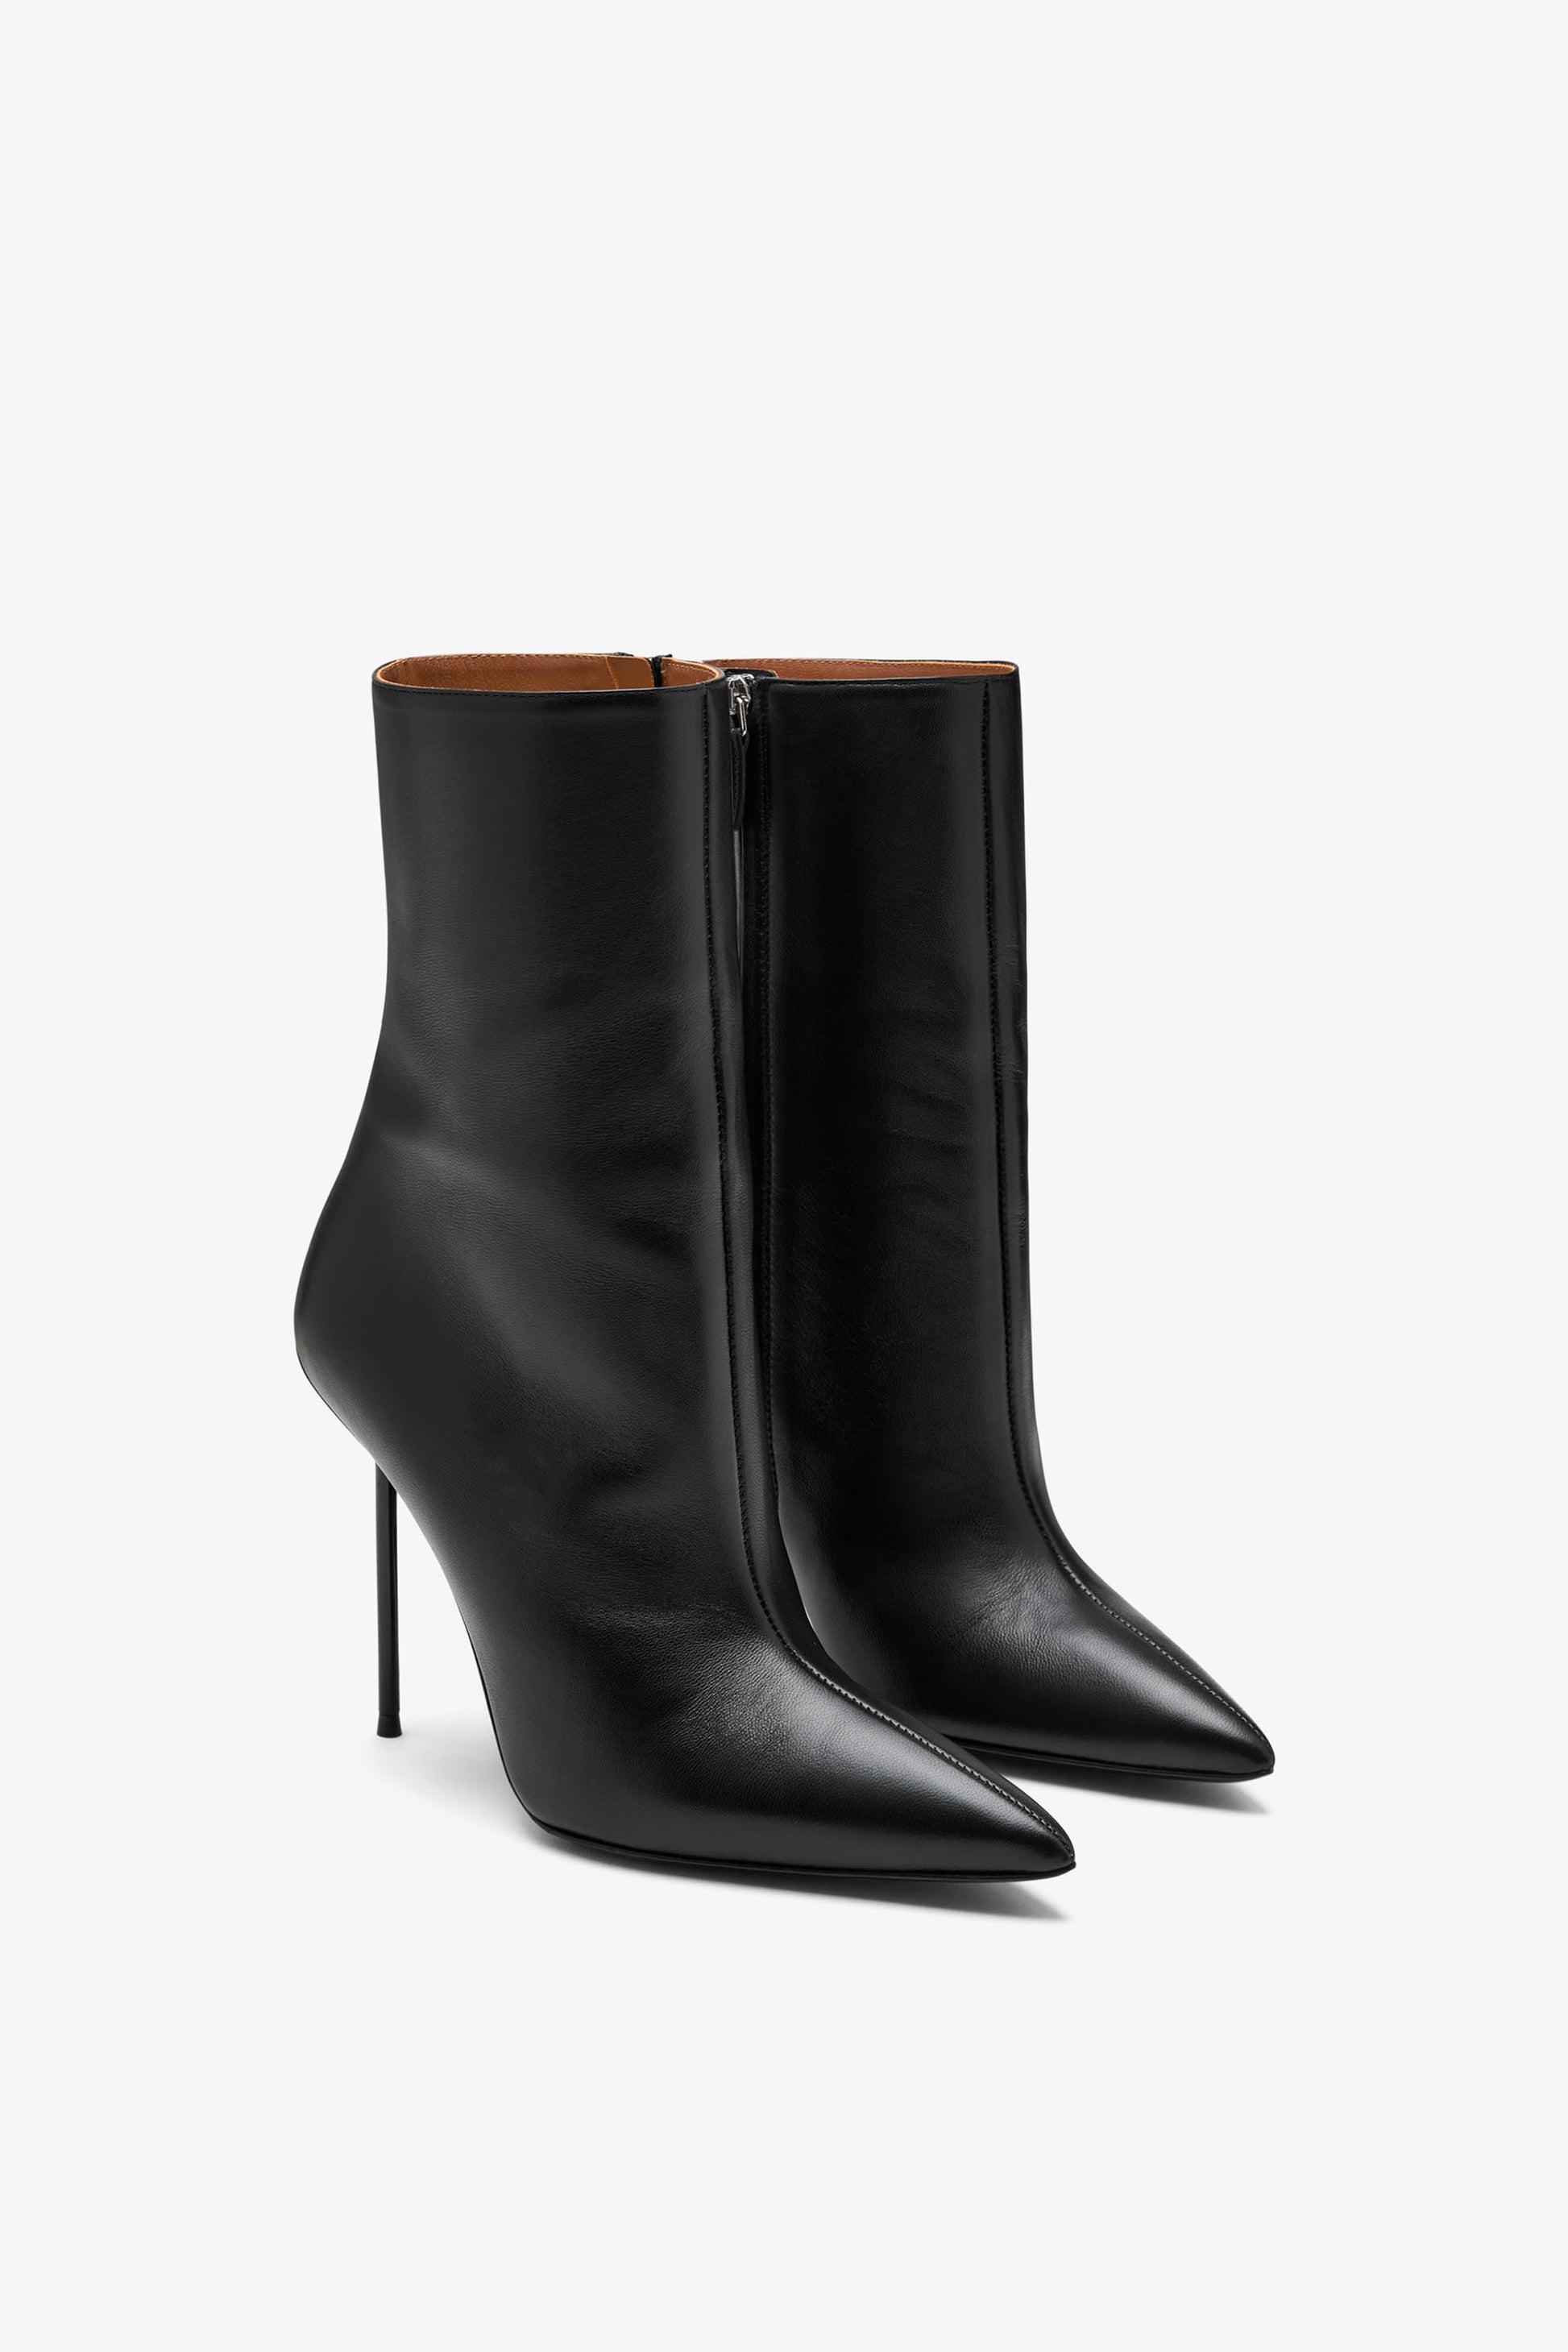 Black nappa leather stiletto ankle boots